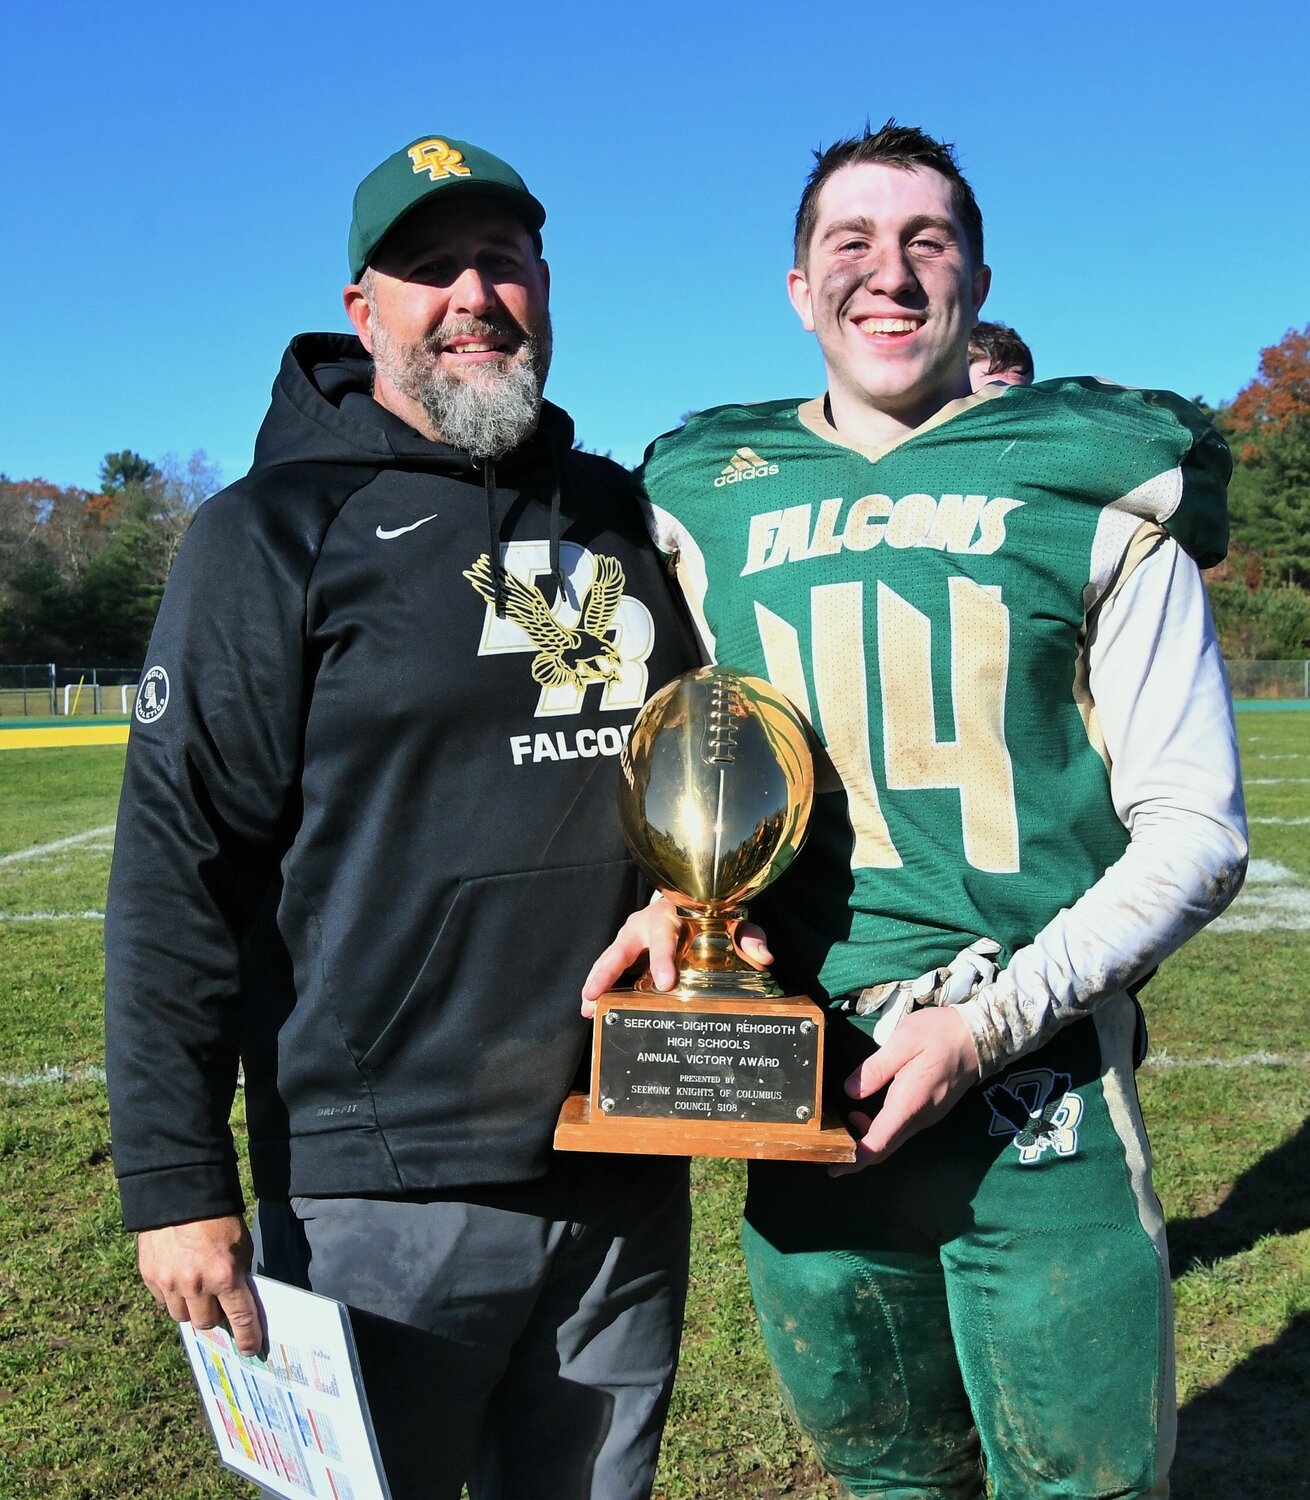 Kevin Gousie, Sr. poses with his son Kevin Gousie, Jr. after winning 42-16 on Thanksgiving.